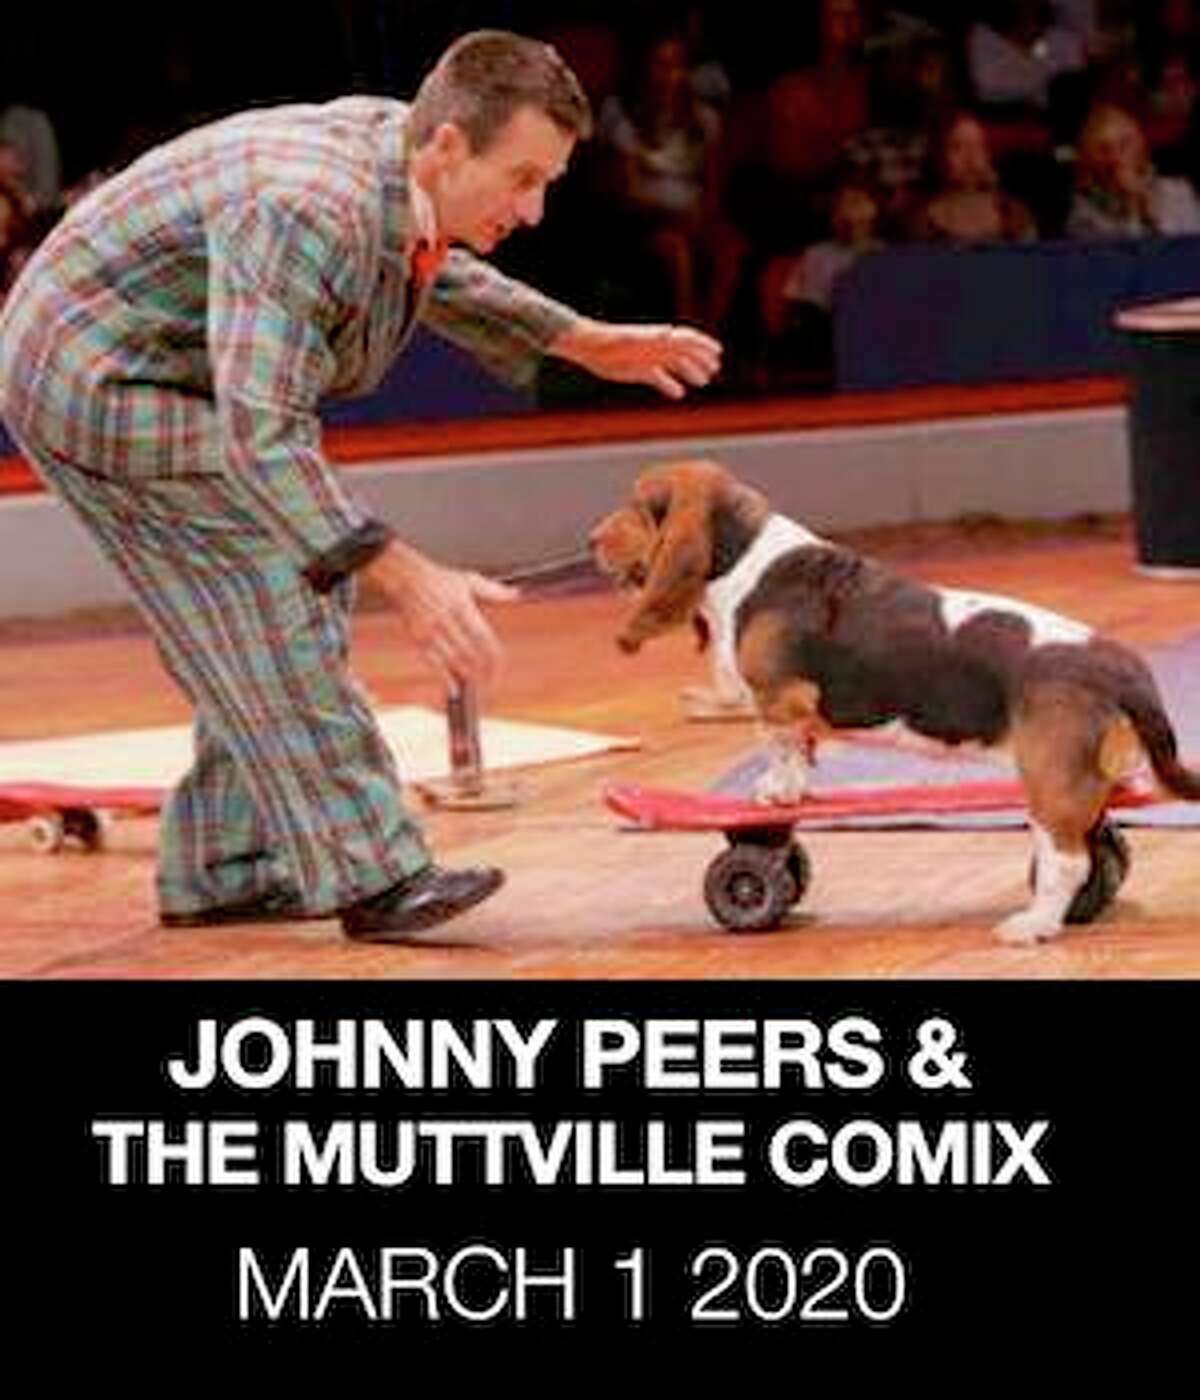 Johnny Peers and The Muttville Comix-Canine Comedy Adventure Show, at the Palace Danbury, on March 1, 1 p.m.